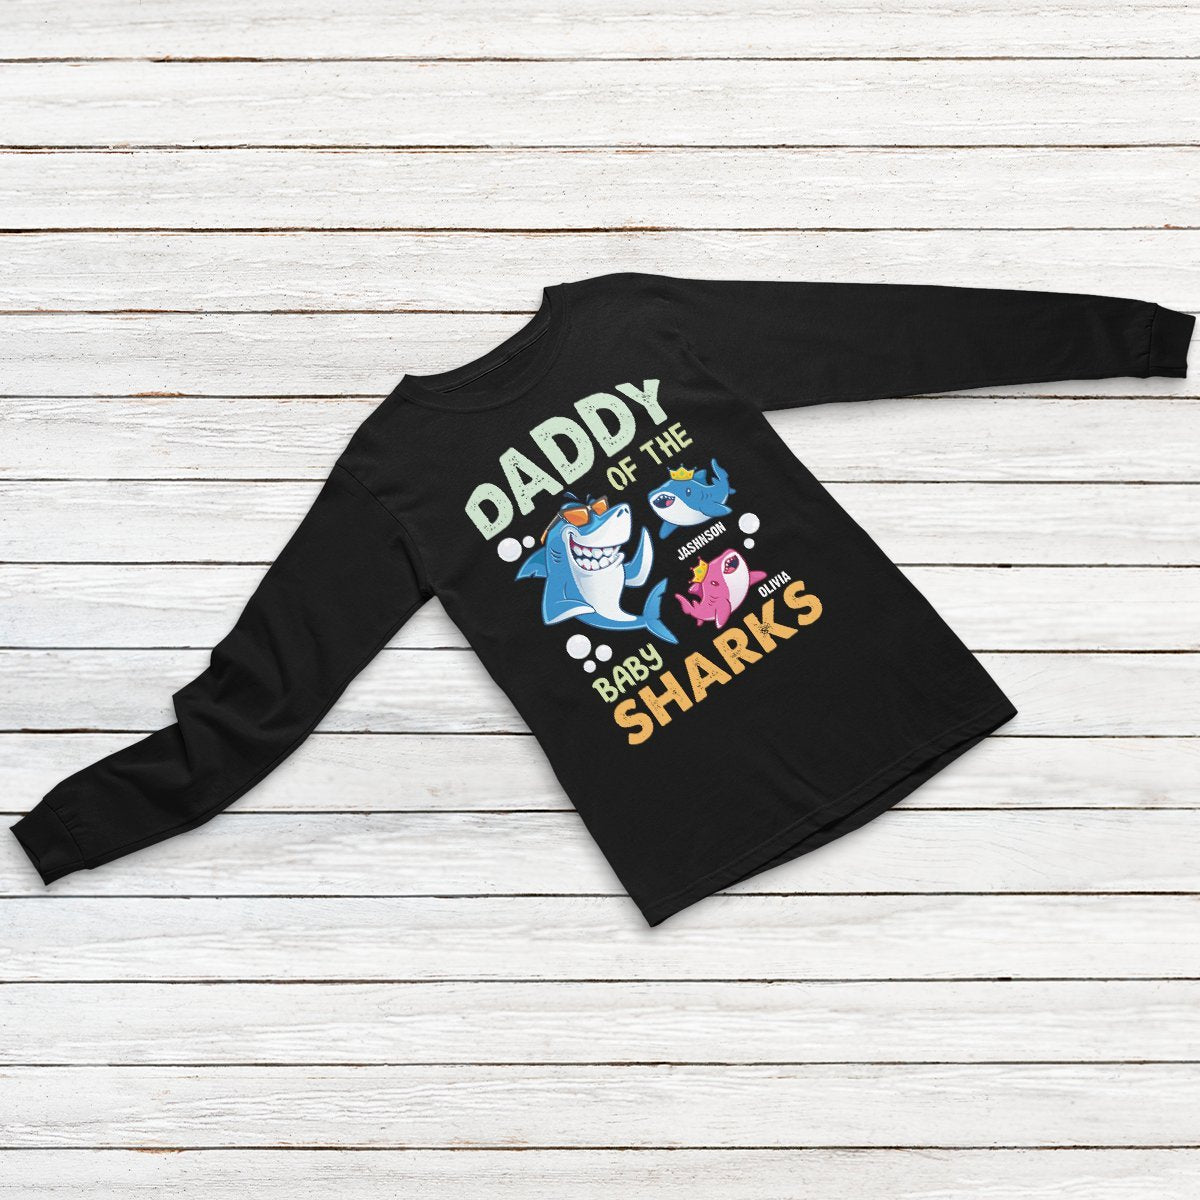 Daddy Of The Baby Sharks Personalized Shirt